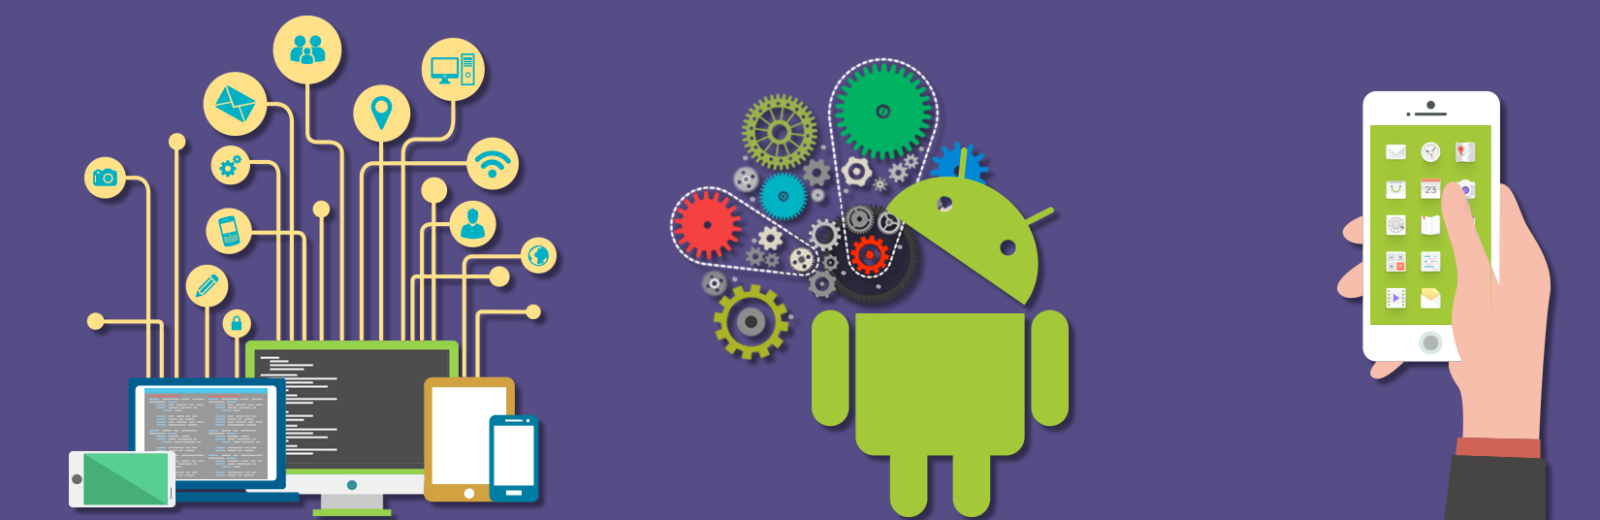 Android-Mobile-Application-Development.png